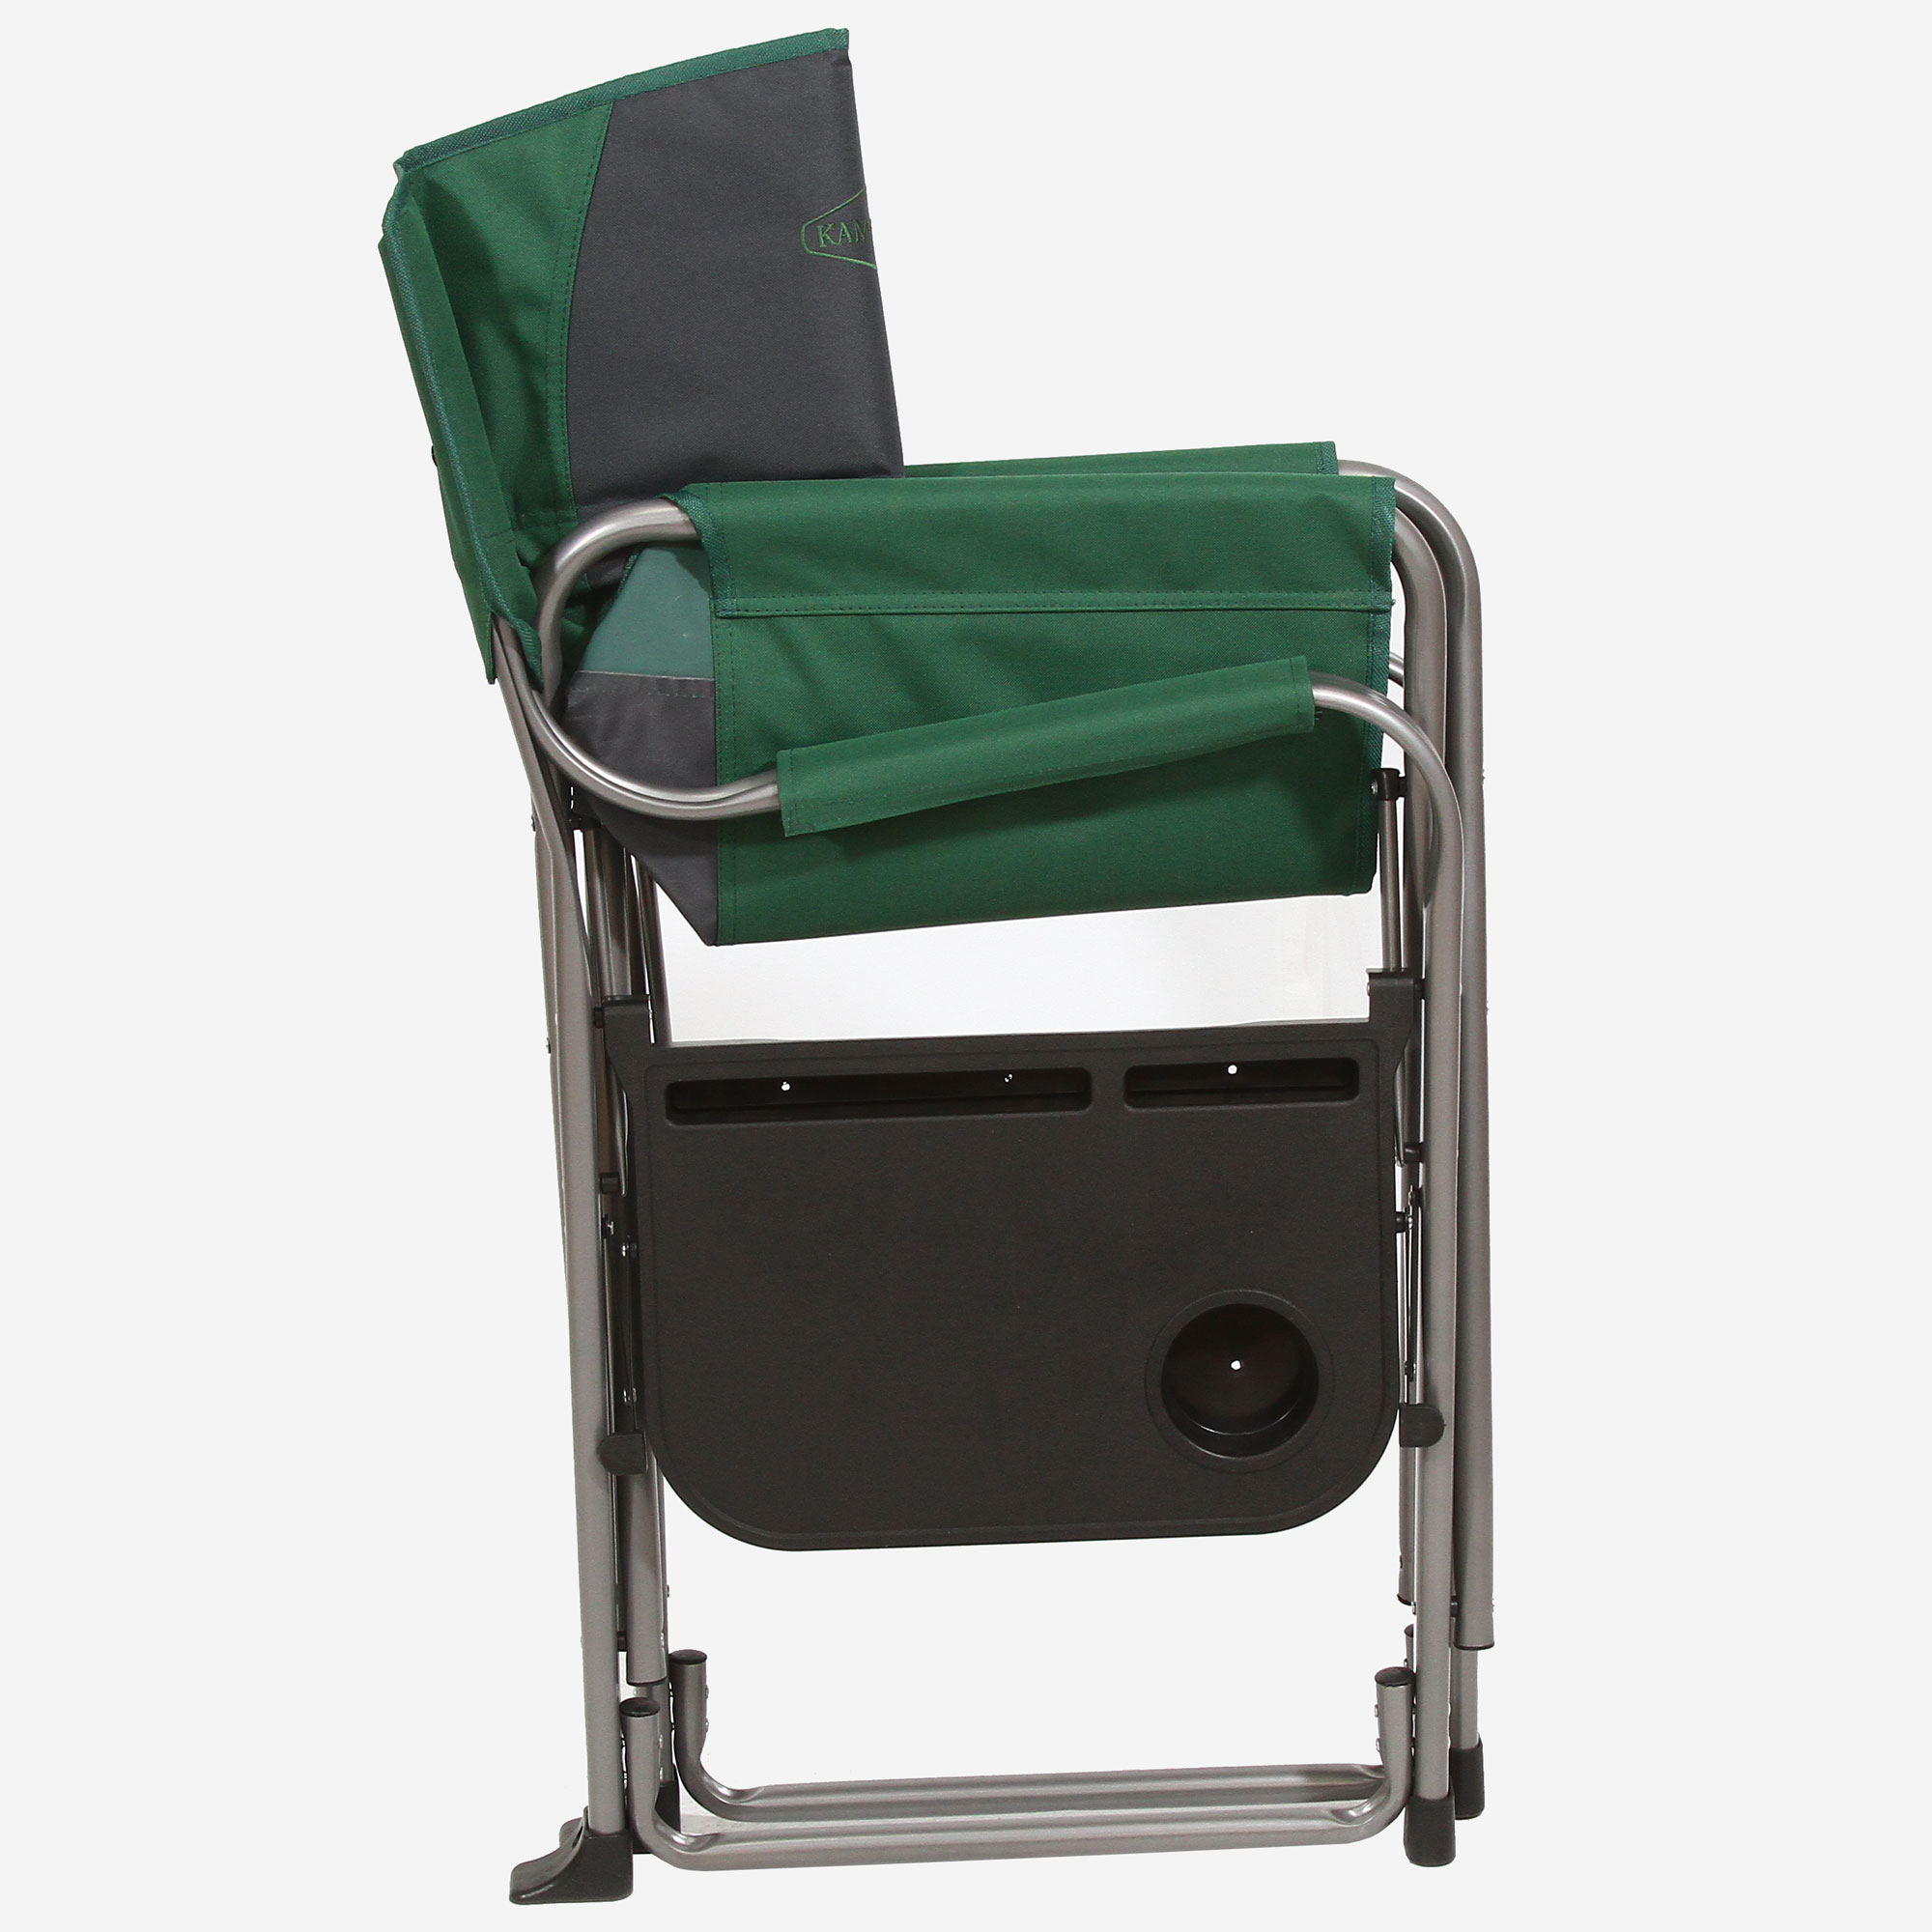 Kamp-Rite Director's Chair Outdoor Camping Folding Chair with Side Table, Green - image 2 of 4